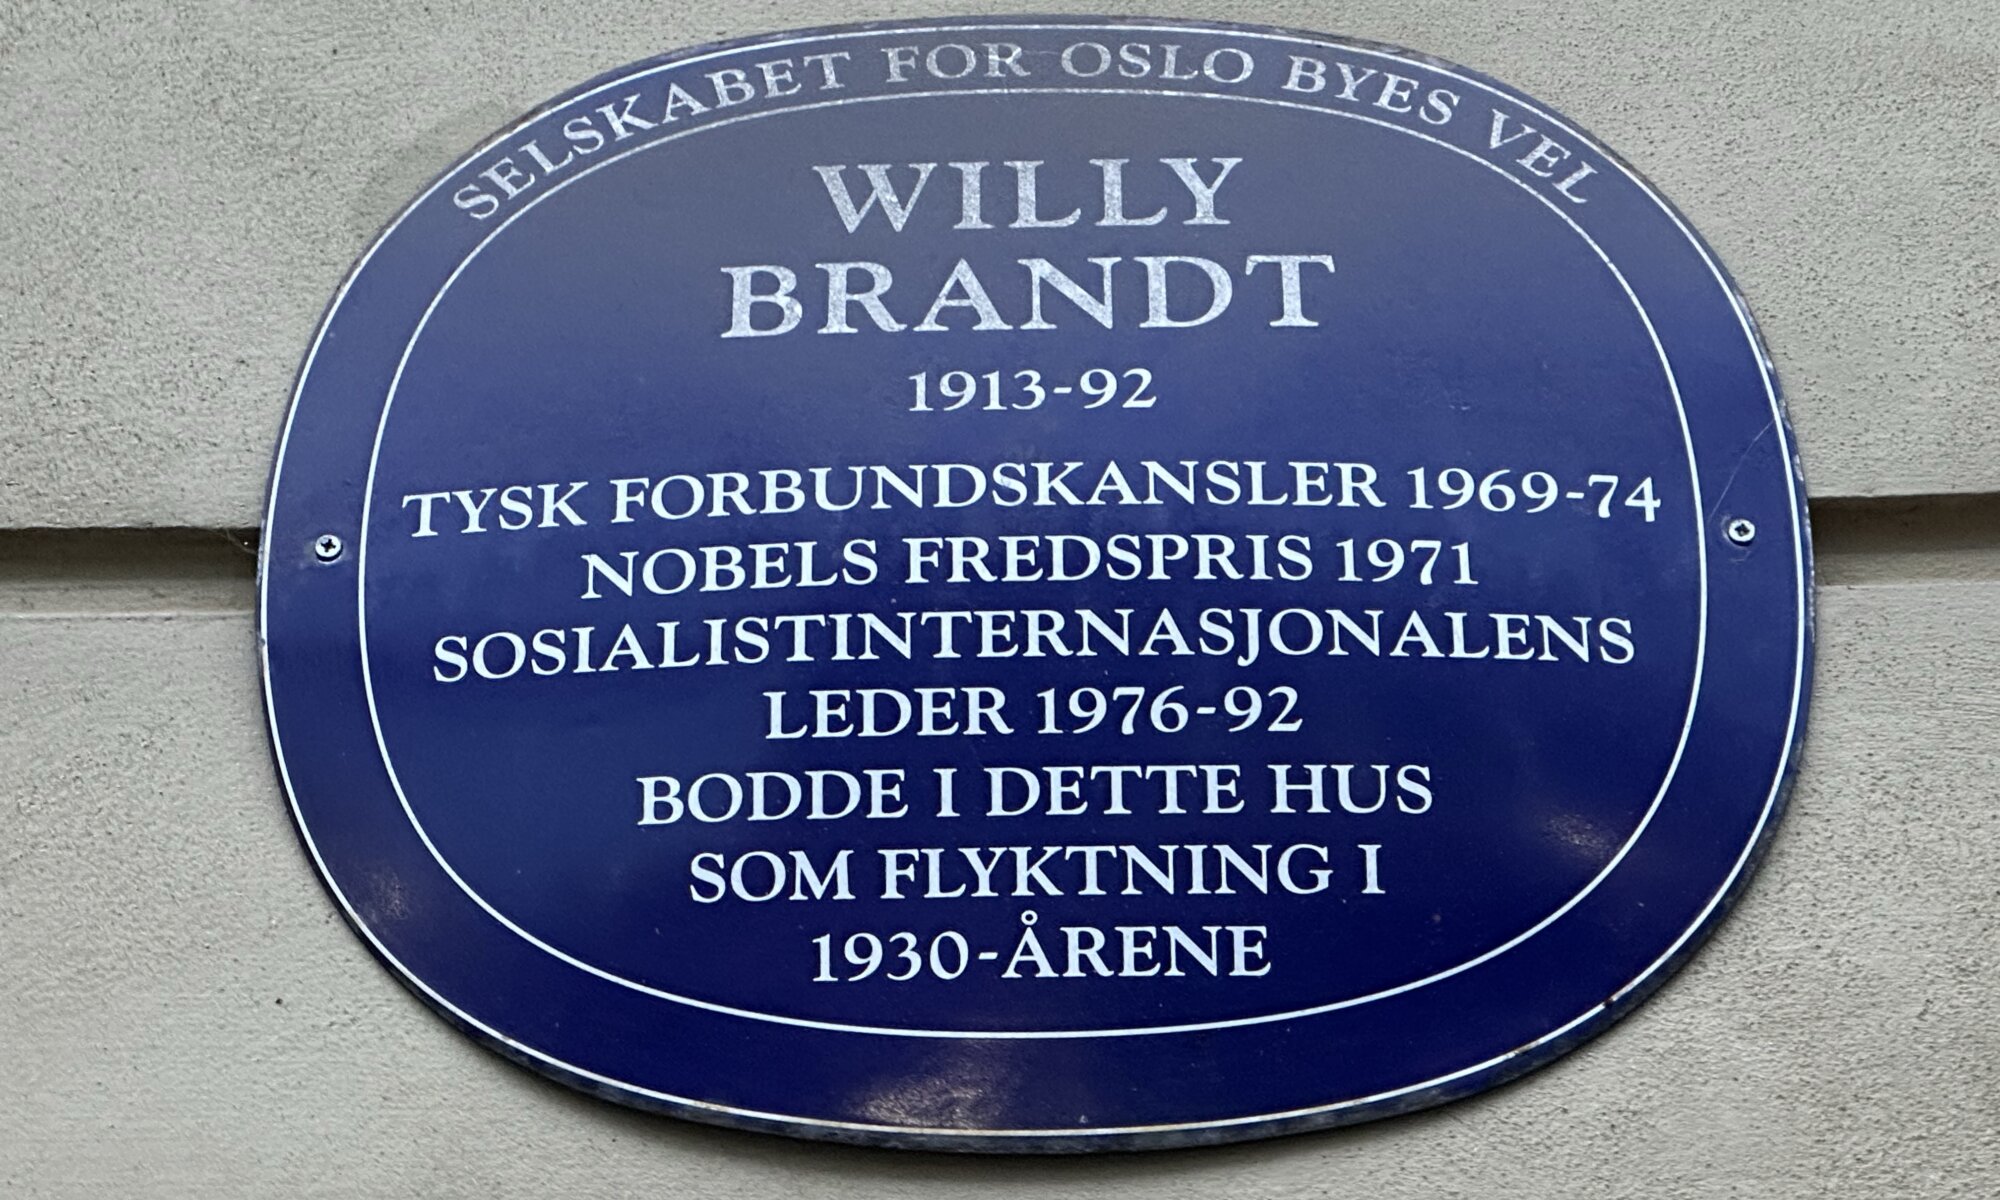 Temporary home of Willy Brandt, Oslo